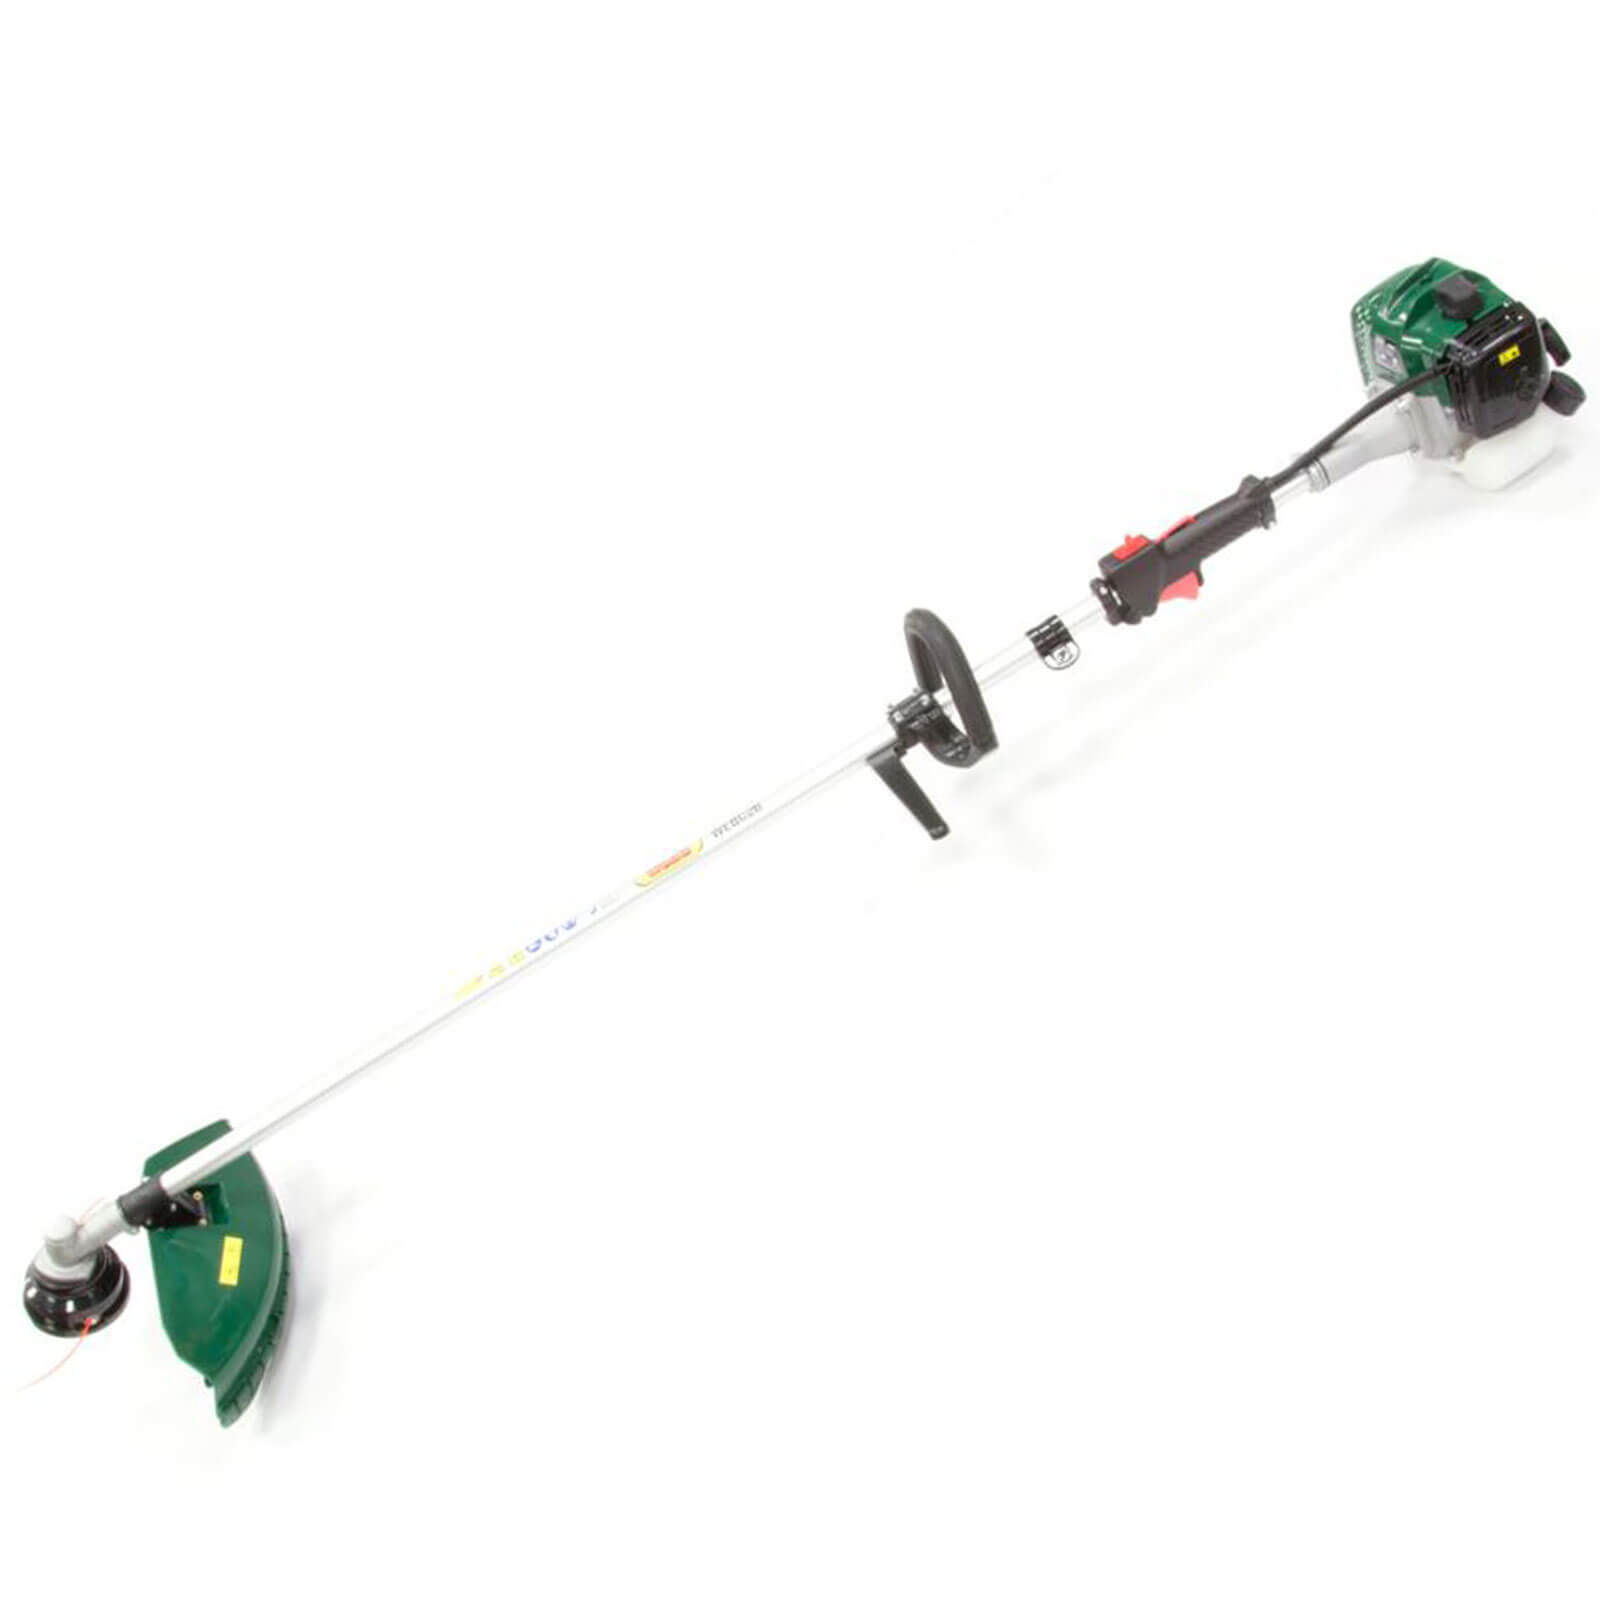 Photo of Webb Webc26 Petrol Brush Cutter And Line Trimmer 250mm Free Garden Gloves & Safety Glasses Worth £6.90